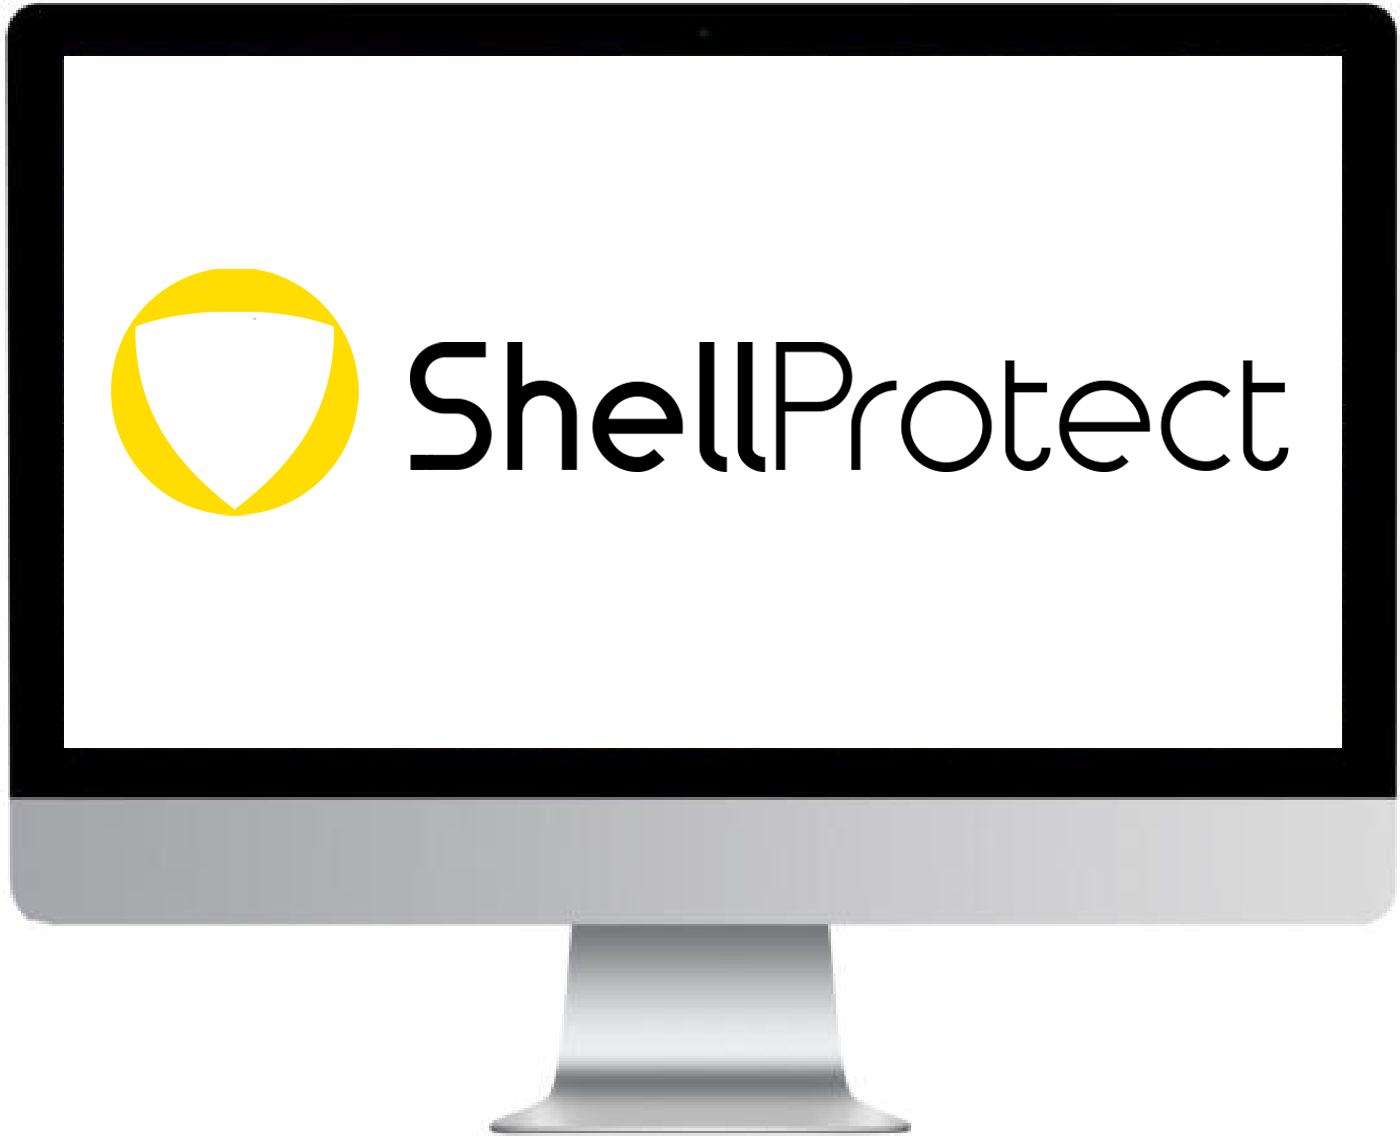 ShellProtect Cyber Security